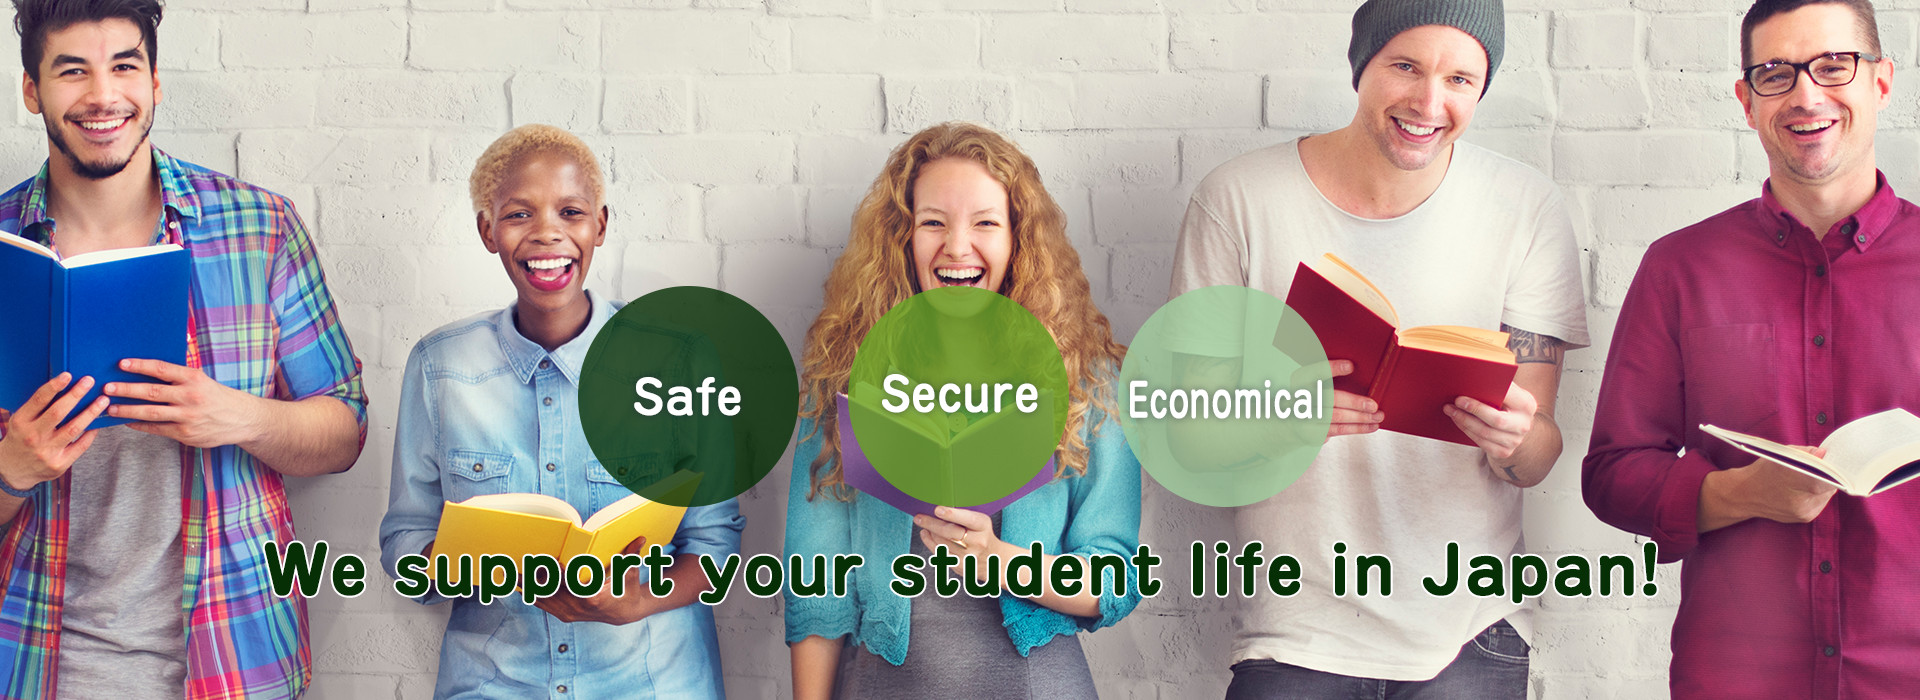 We support your student life in Japan!